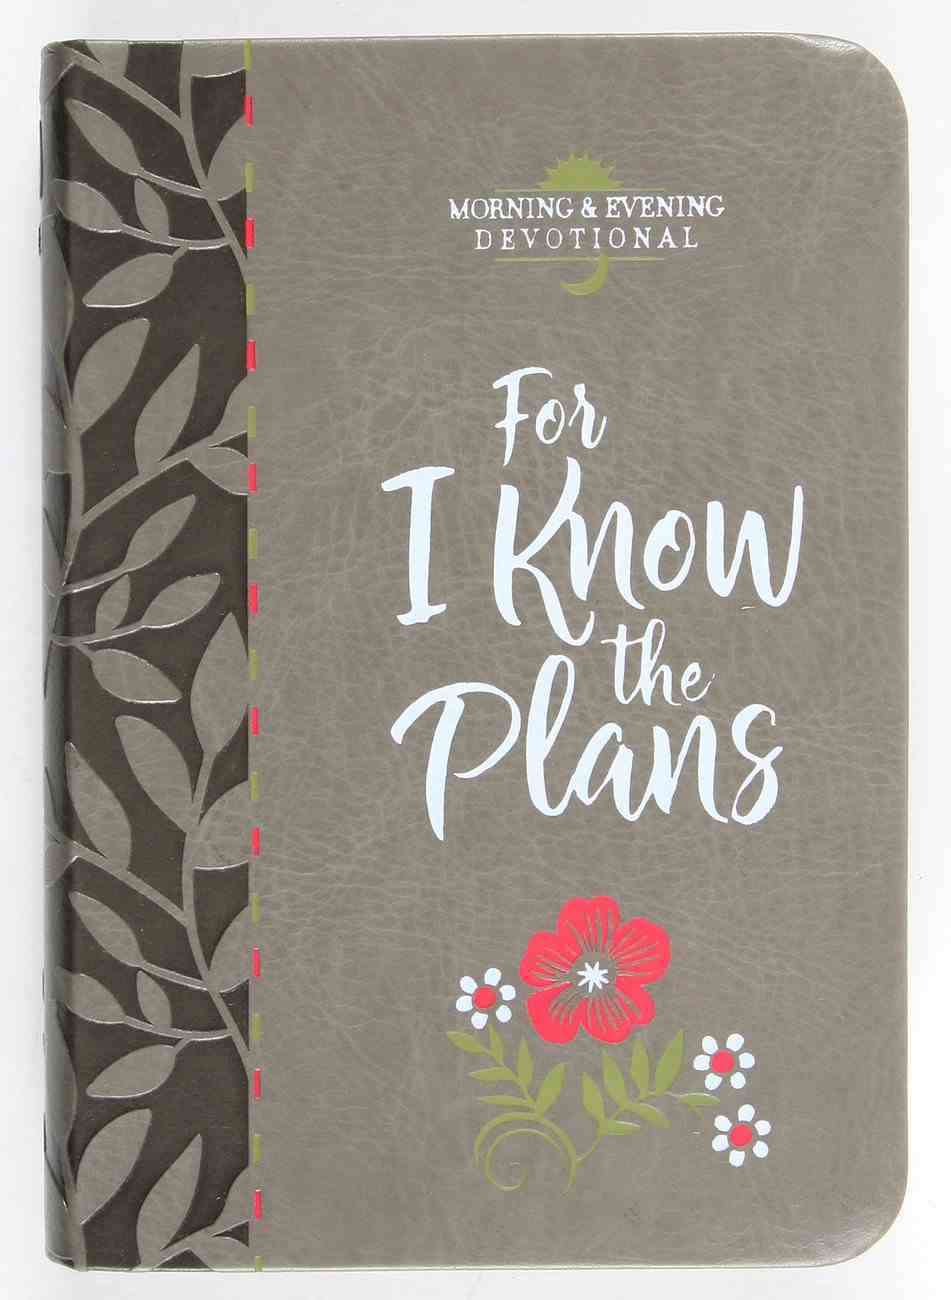 For I Know the Plans: Morning & Evening Devotional Imitation Leather